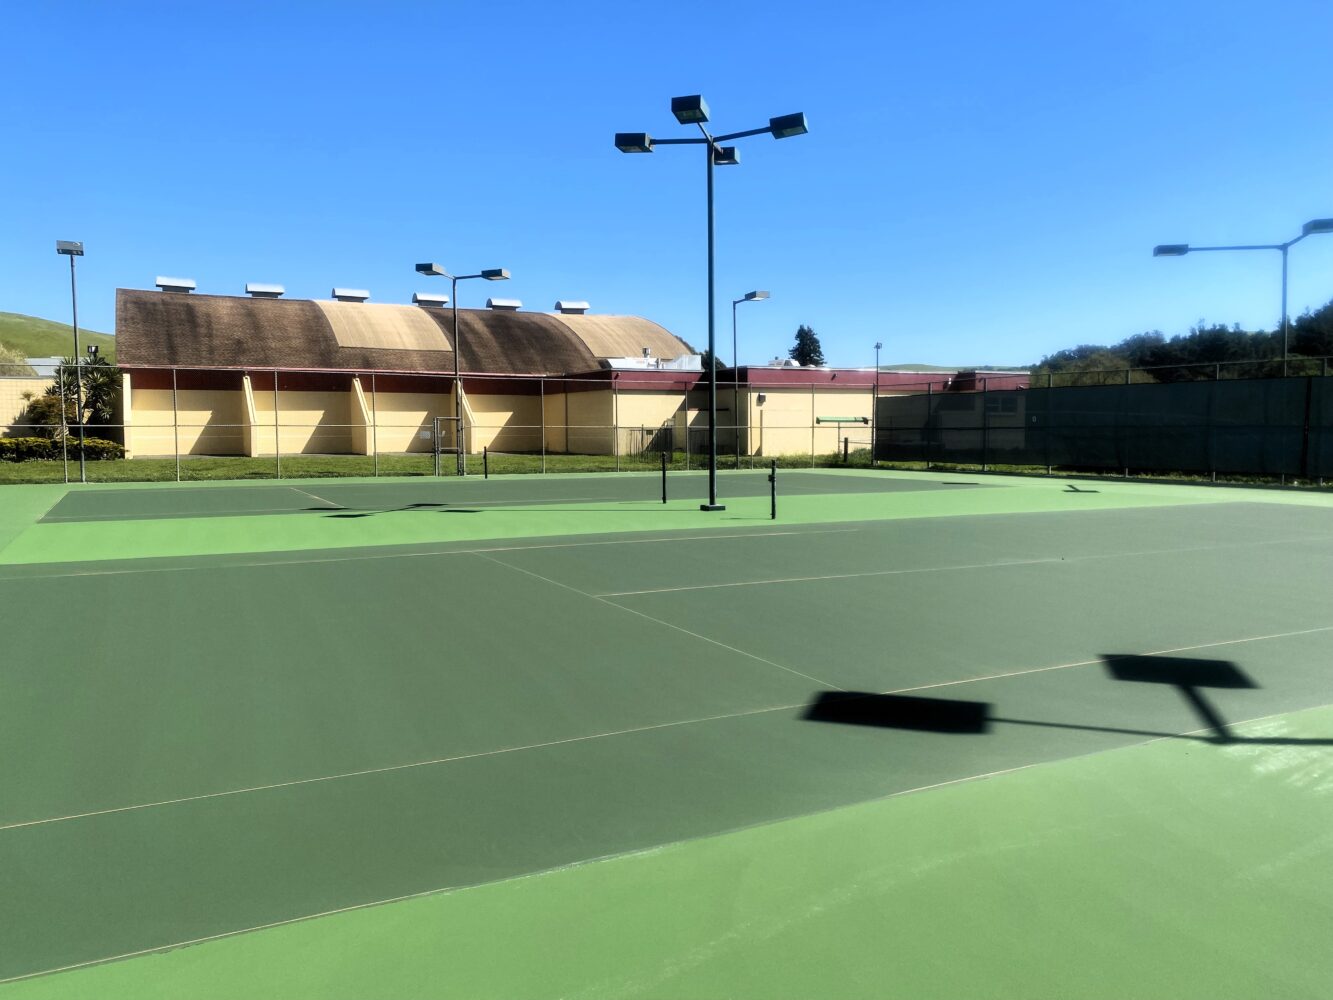 Tennis Club Gives the Courts a Facelift